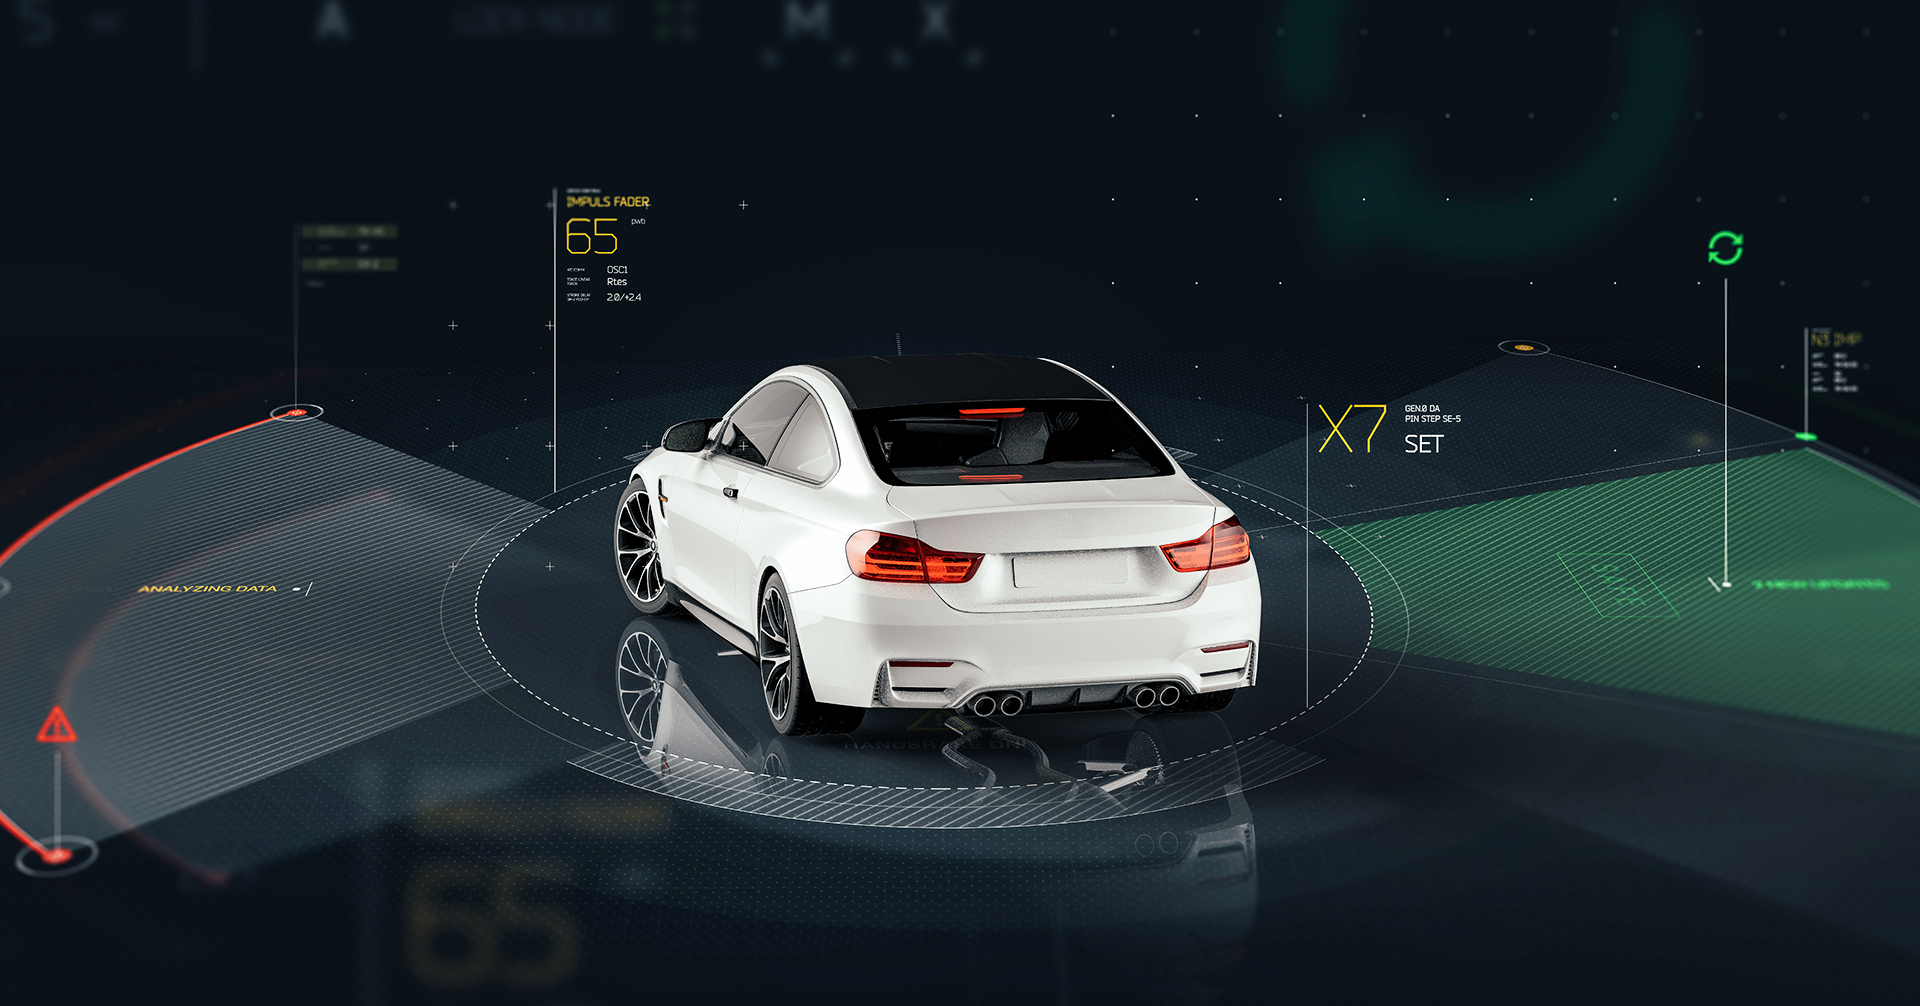 ADAS mainly uses various sensors and software interactive applications